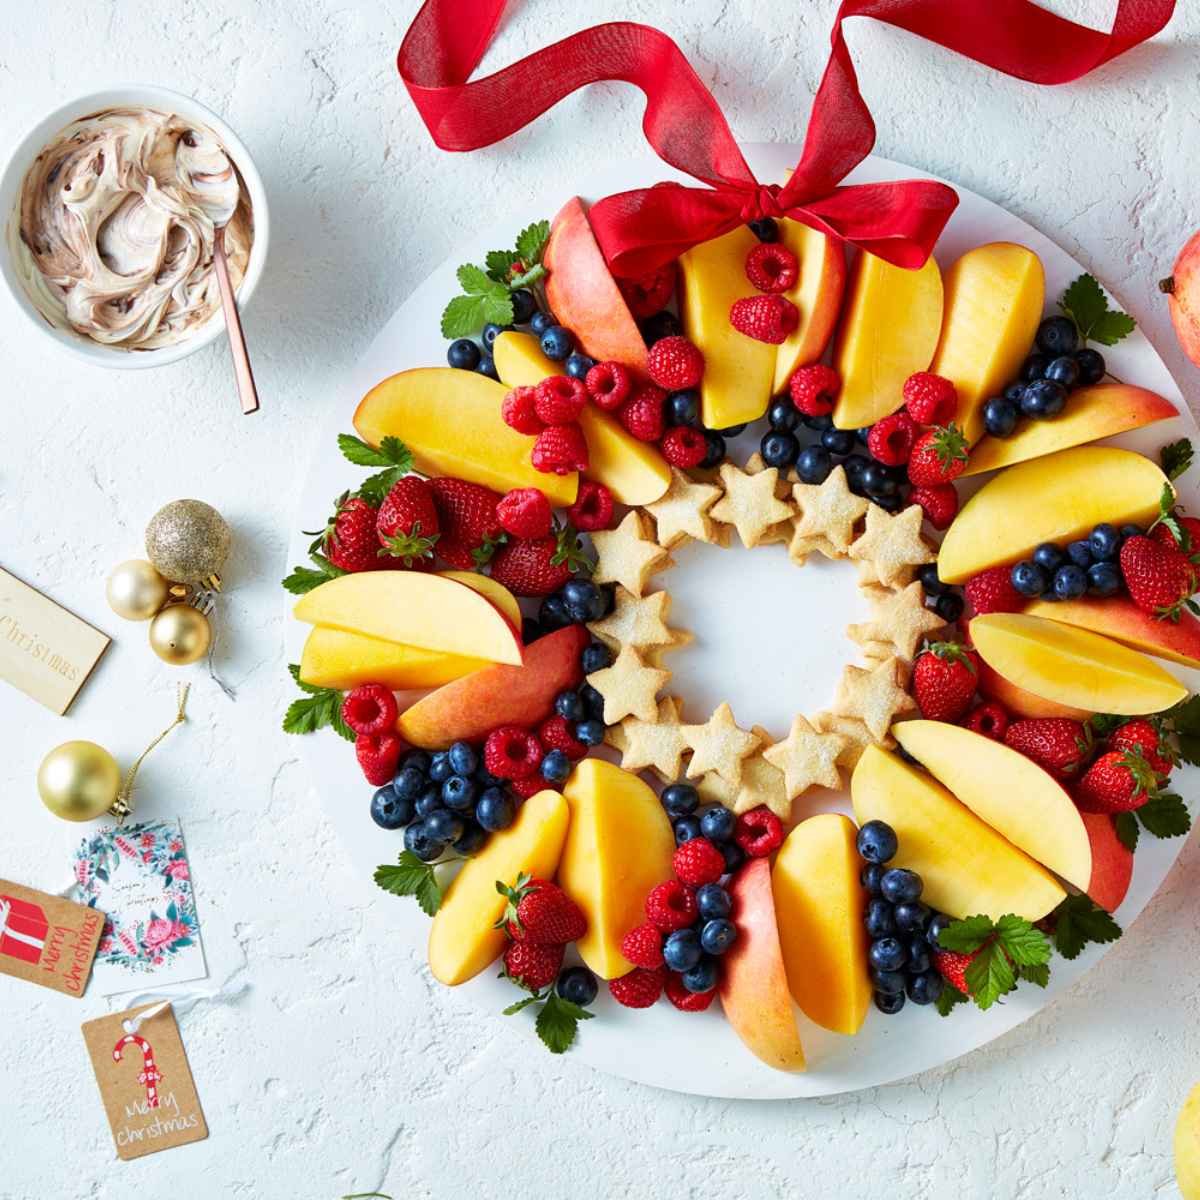 A white plate topped with a fruit wreath made out of Calypso mangoes, berries and biscuits.